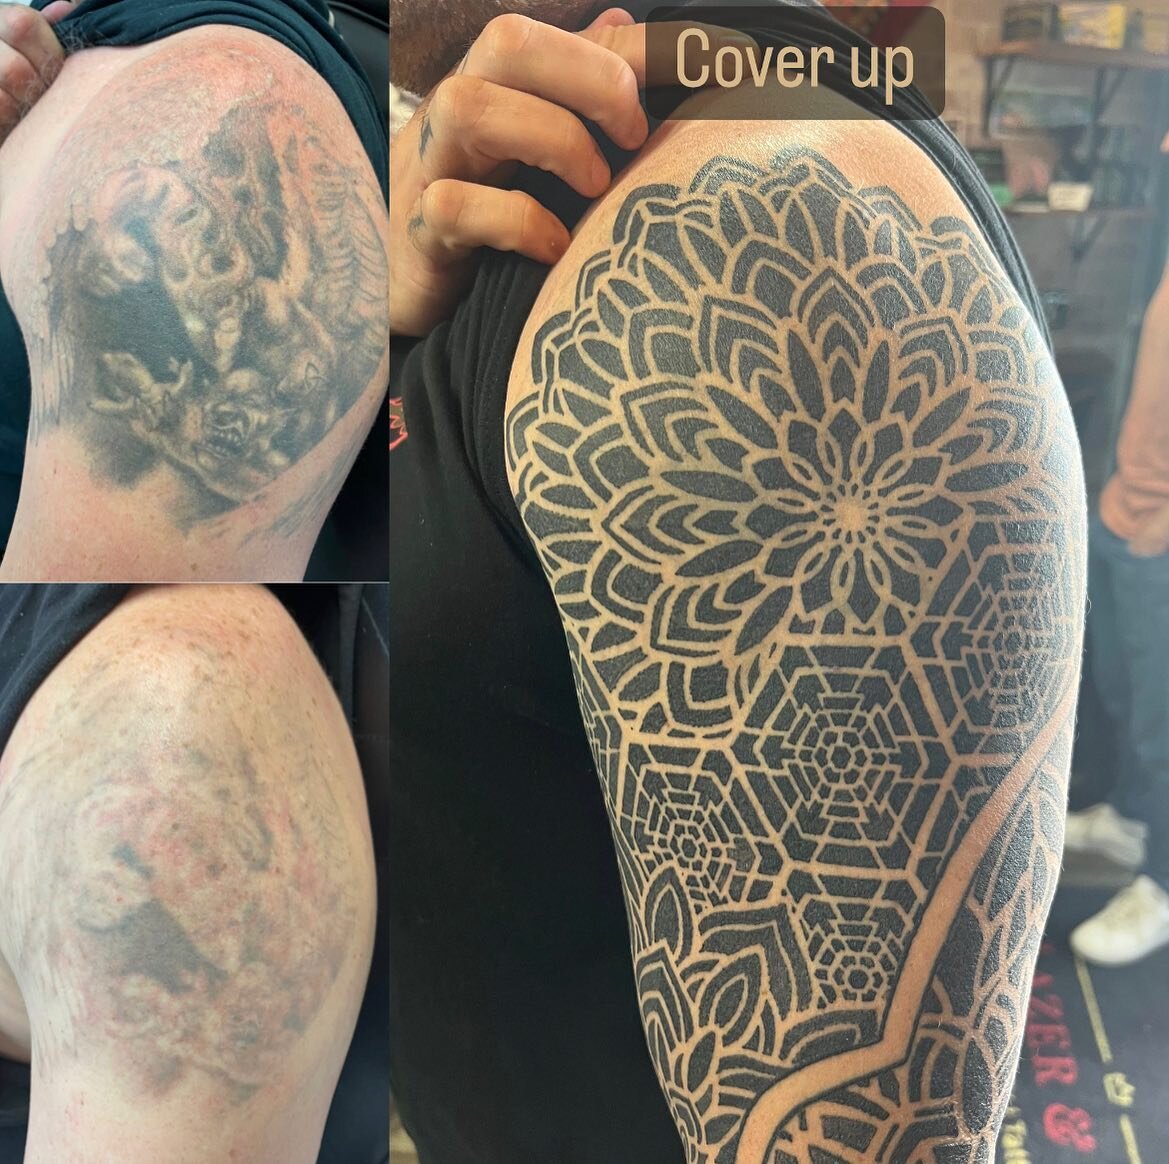 A cover up for one of our clients. This tattoo required 3 sessions to lighten to this affect.
.
.
.
.
#lazerandco #lazer #laser #lasertattooremoval #tattooremoval #tattooremovalspecialists #tattooremovalbeforeandafter #sunshinecoast #sunshinecoastbus